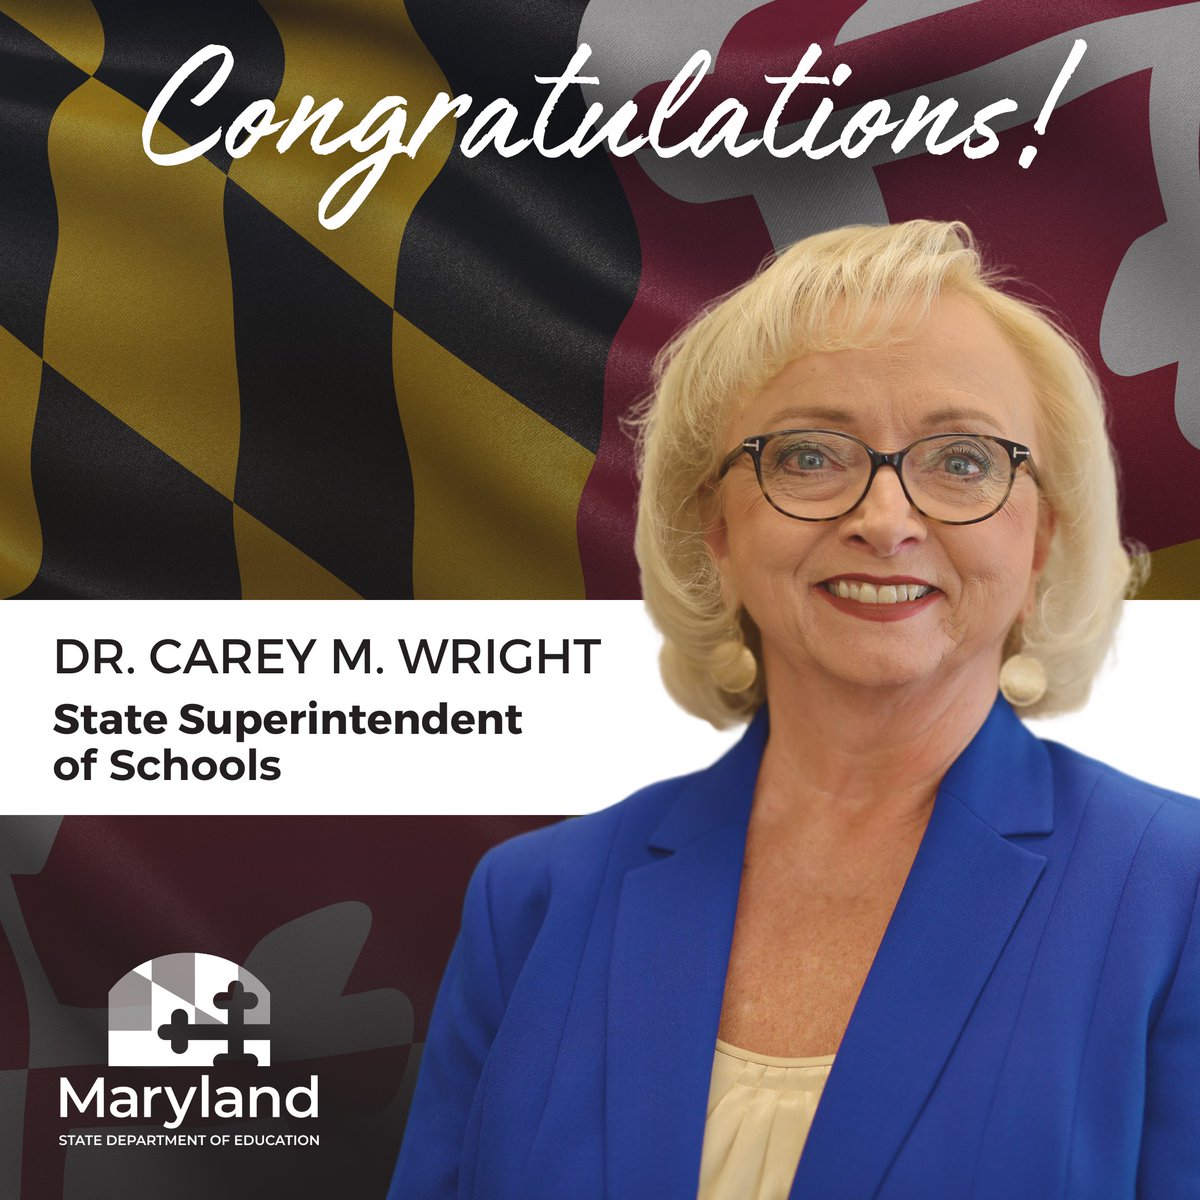 We are thrilled to announce that Dr. Carey M. Wright has been appointed Maryland's new State Superintendent of Schools! Congratulations, Dr. Wright!